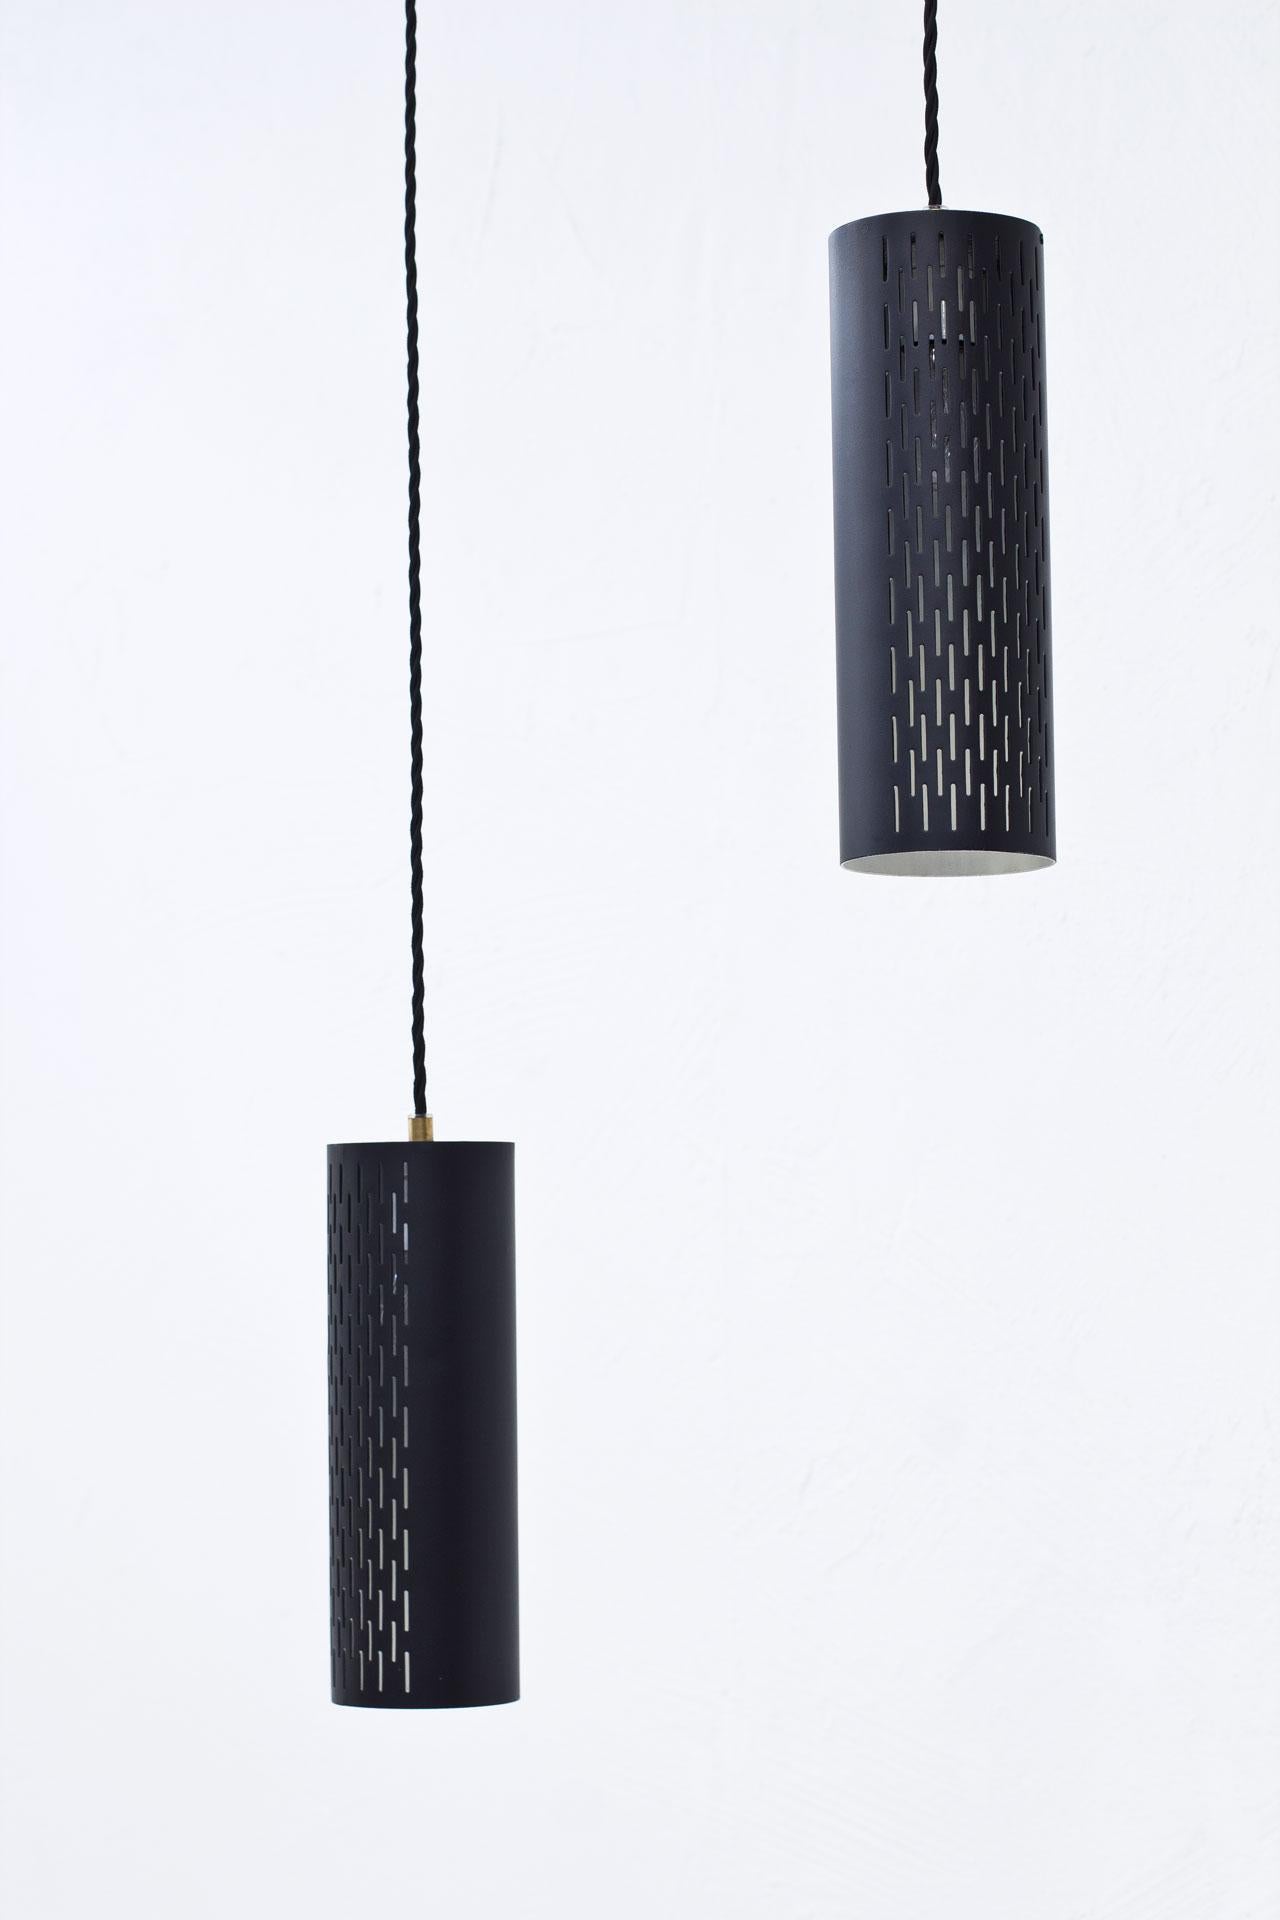 Neat pair of pendant lamps model 179 designed by Hans Bergström for Ateljé Lyktan.
Manufactured in Sweden during the 1950s.
Perforated black lacquered metal shades with brass fittings.
New electricity.